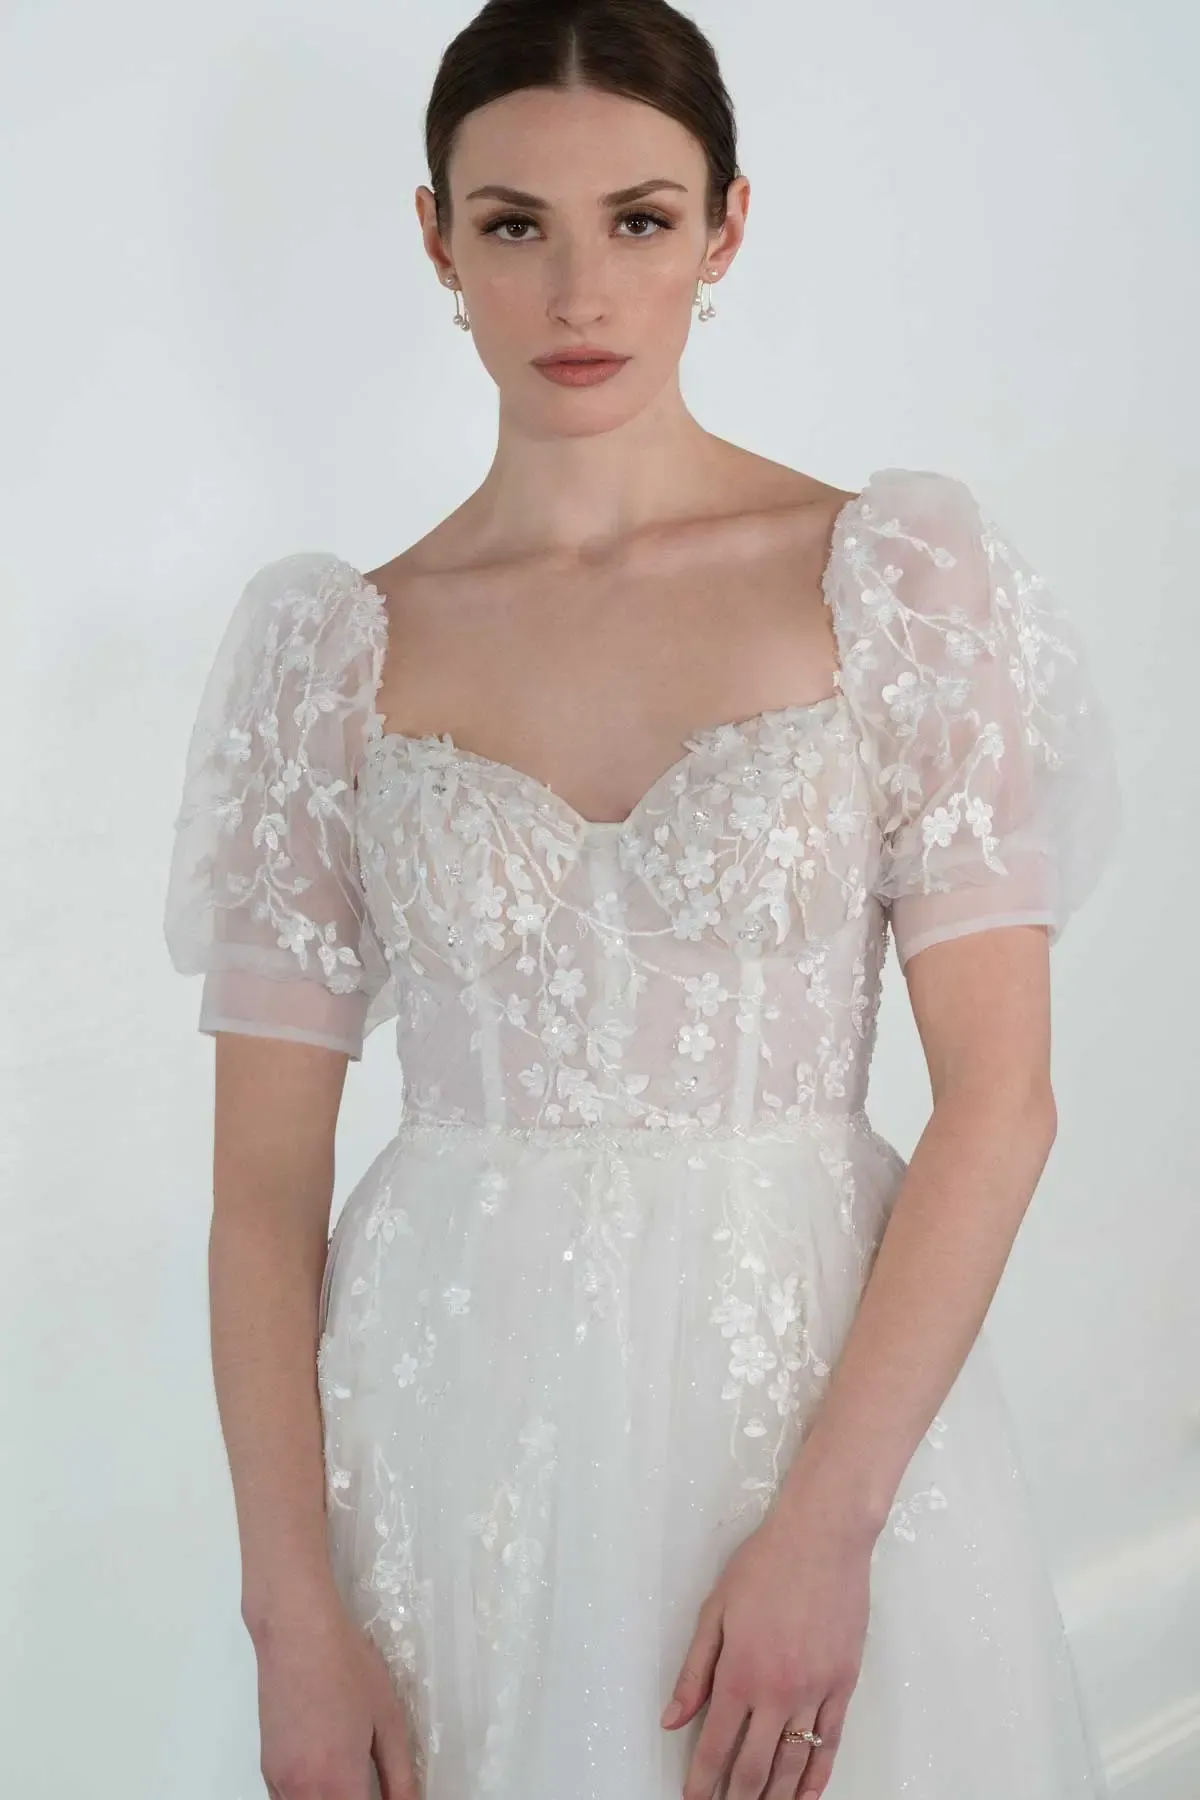 Lace wedding dress with puffy sleeves by Martina Liana.